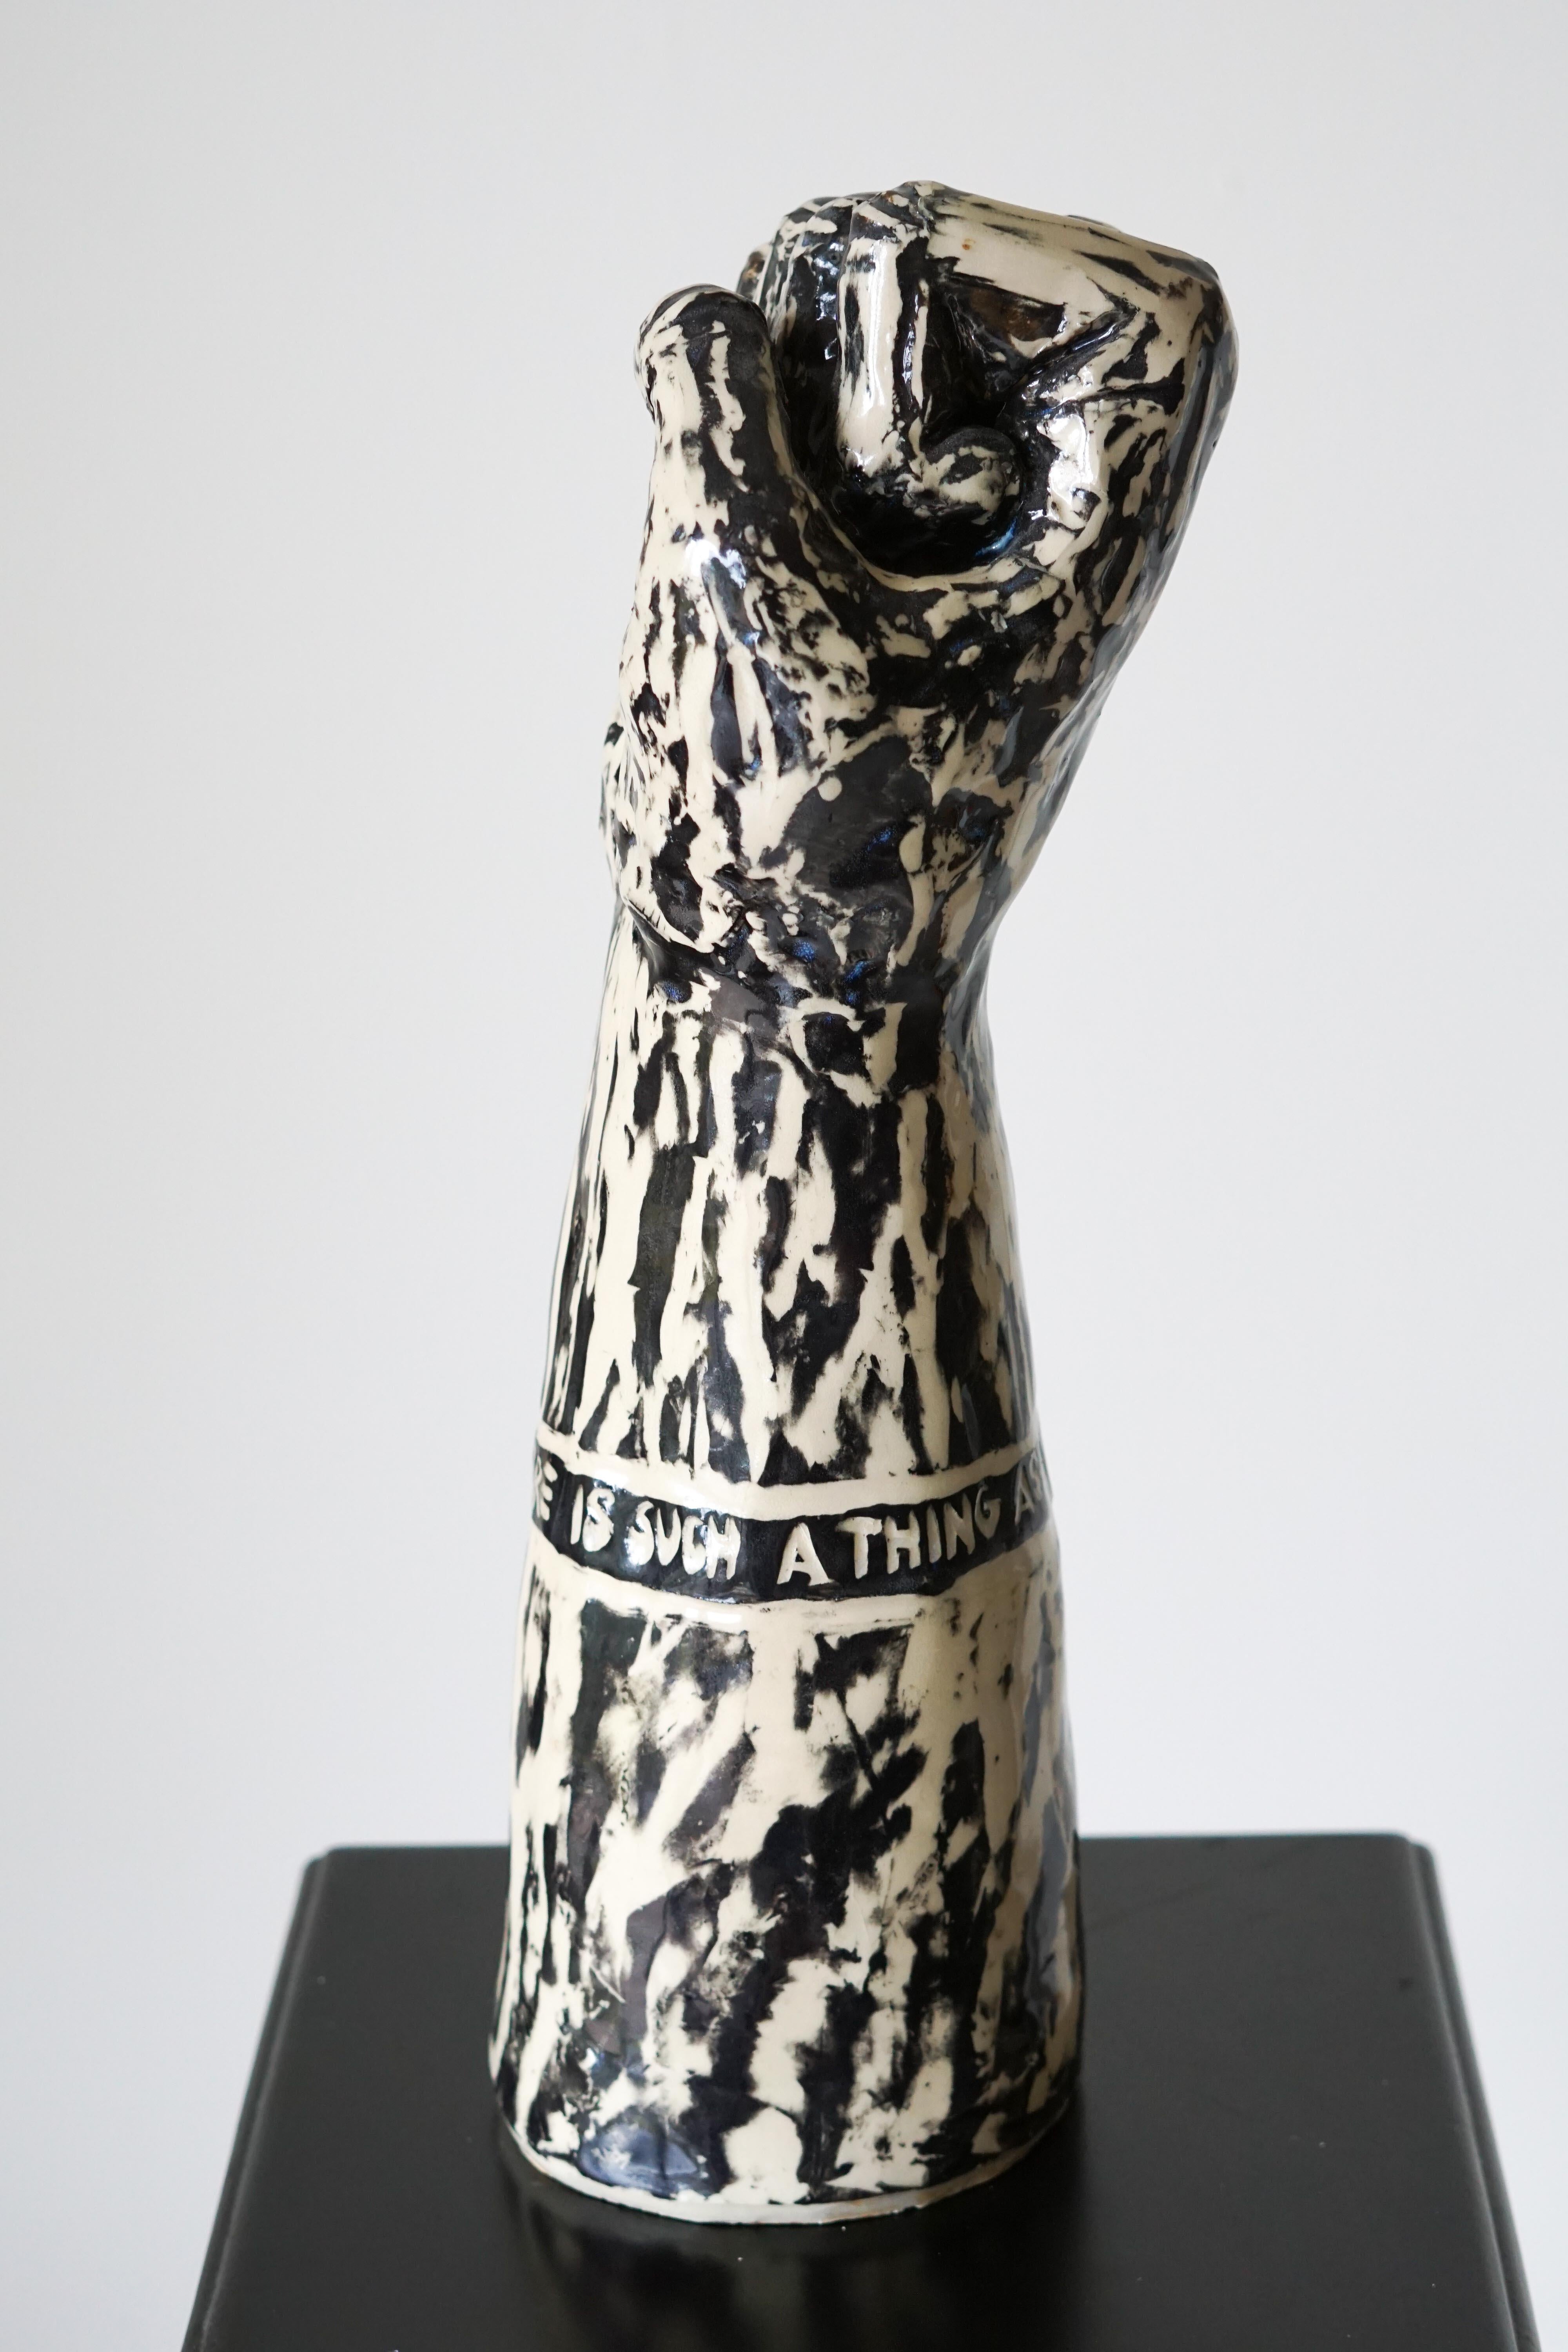 A fist is not a fight
Ceramic sculpture with under glaze Sgraffito


This sculpture features a white and black scraped surface with hints of blue glaze gathered in some crevices. The arm carries a quote around the form which reads,” There is